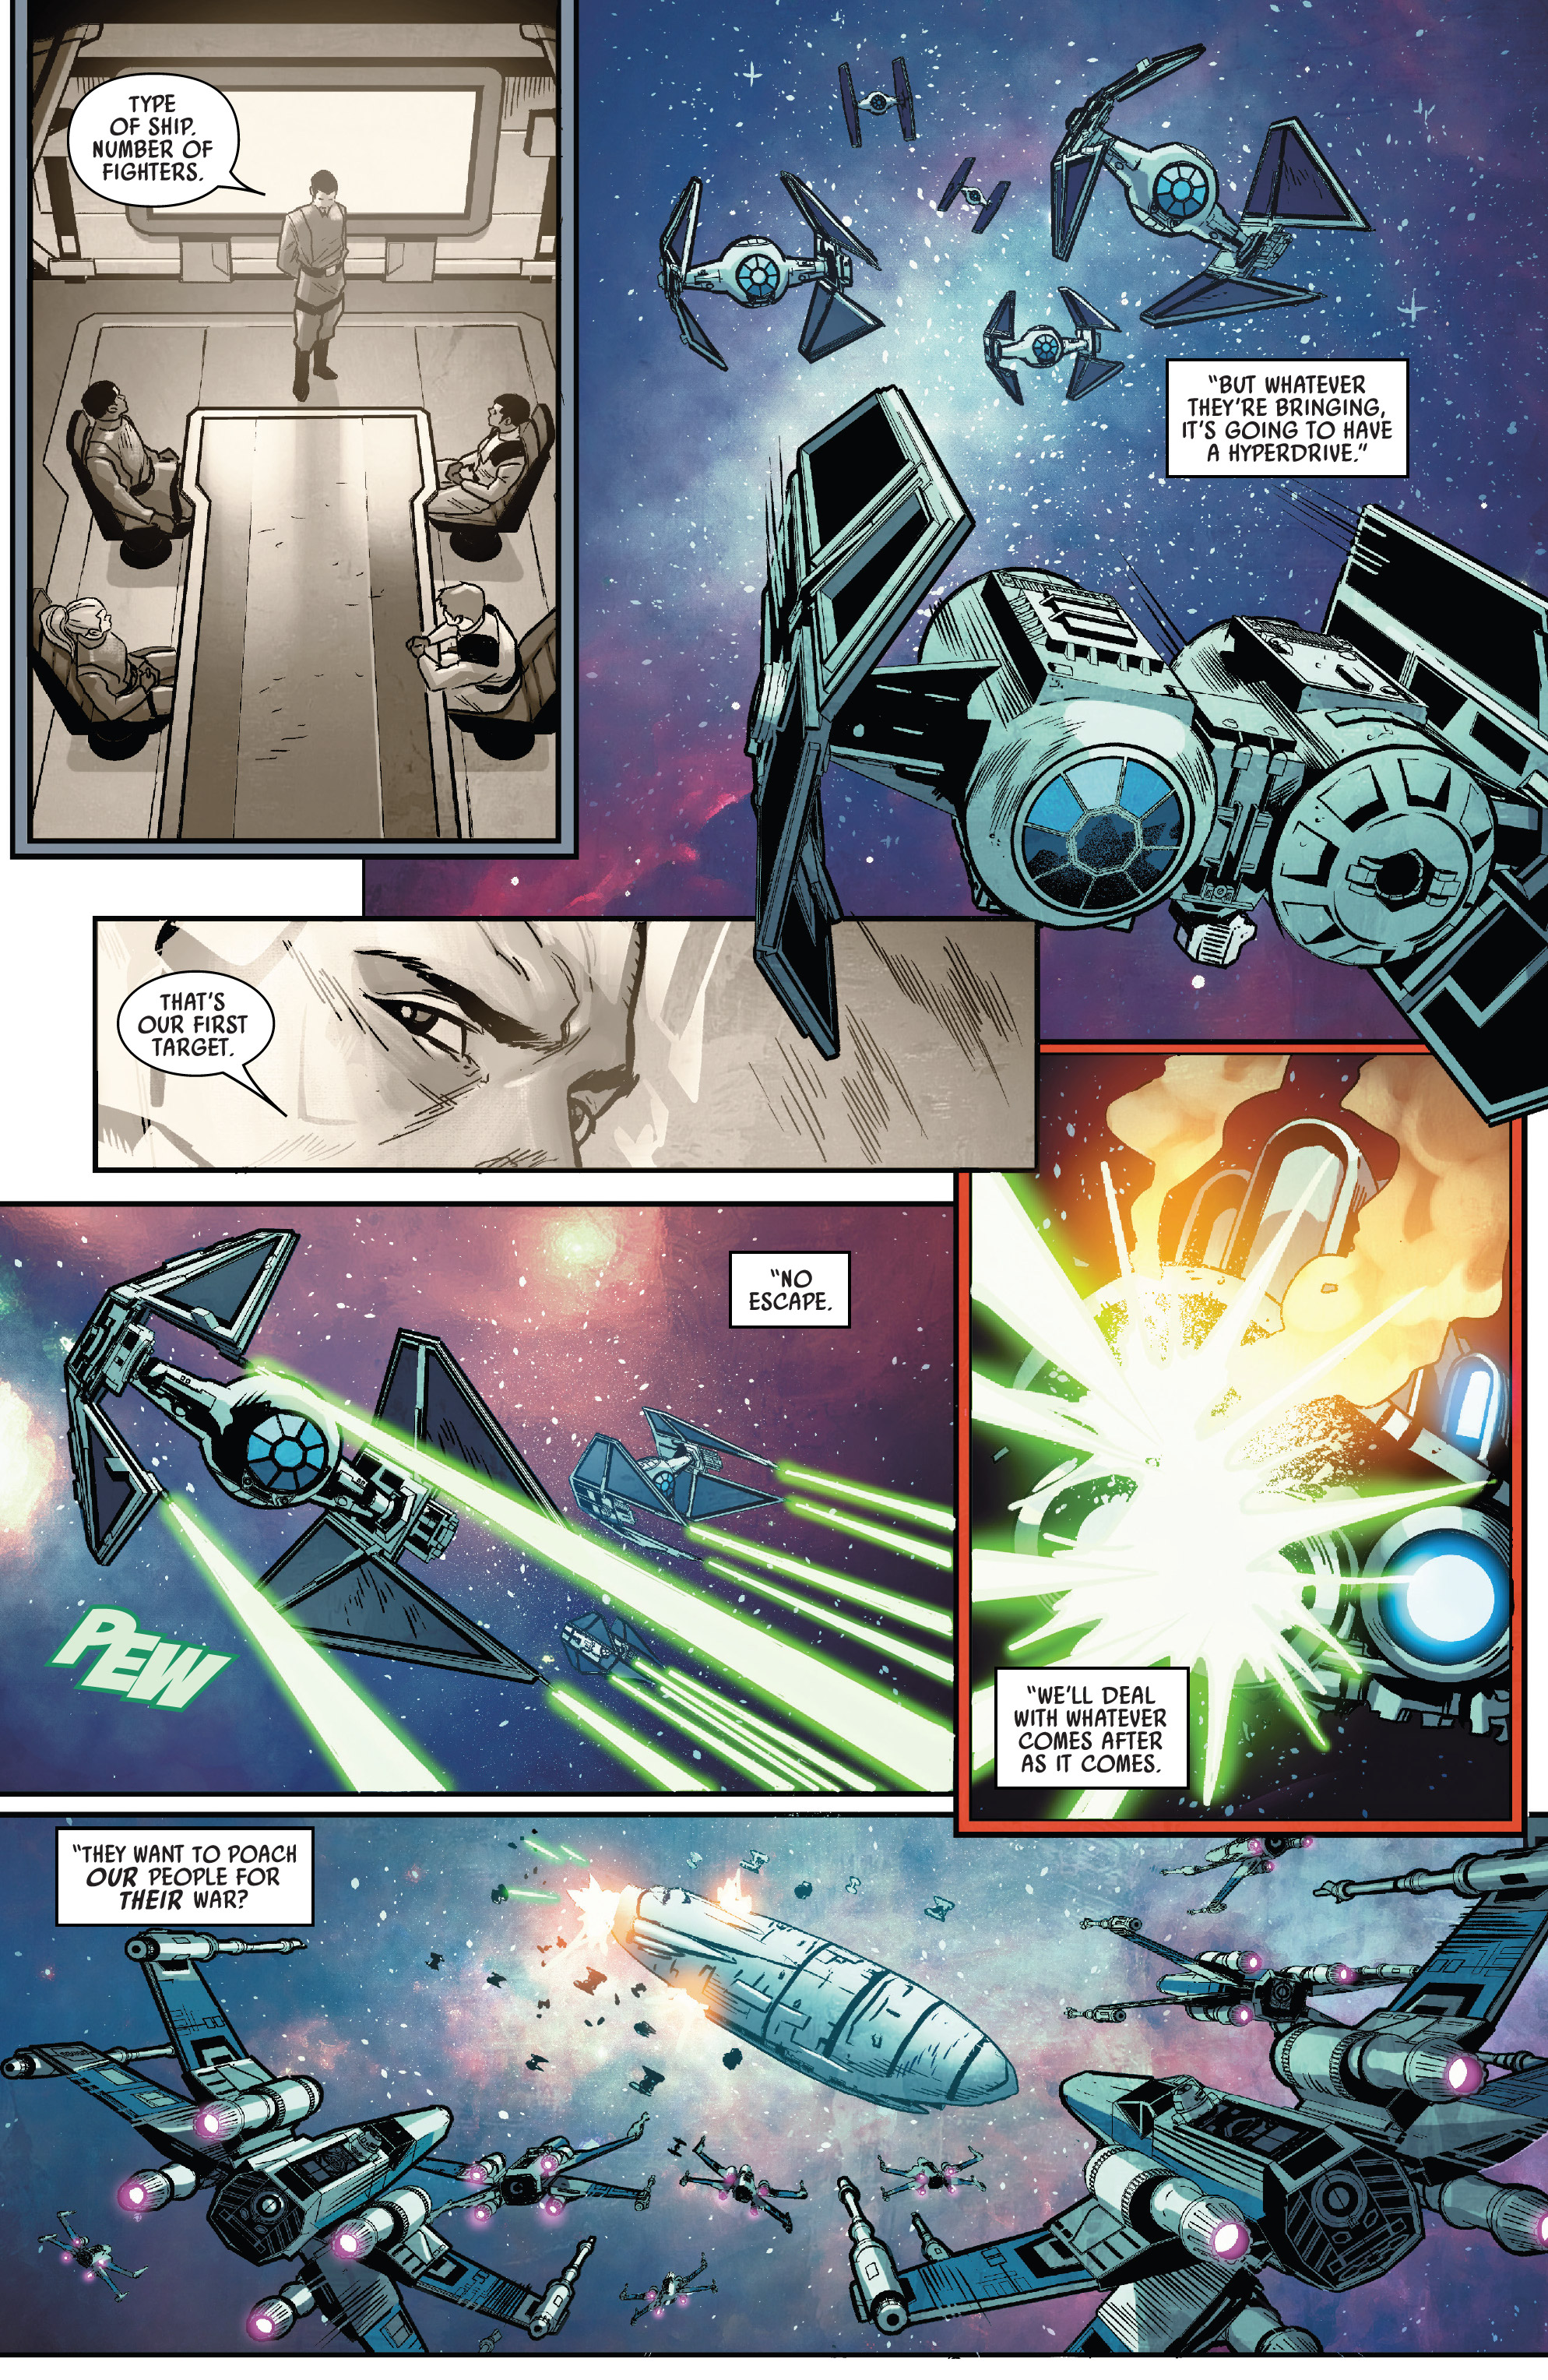 Star Wars: Tie Fighter (2019-): Chapter 5 - Page 4